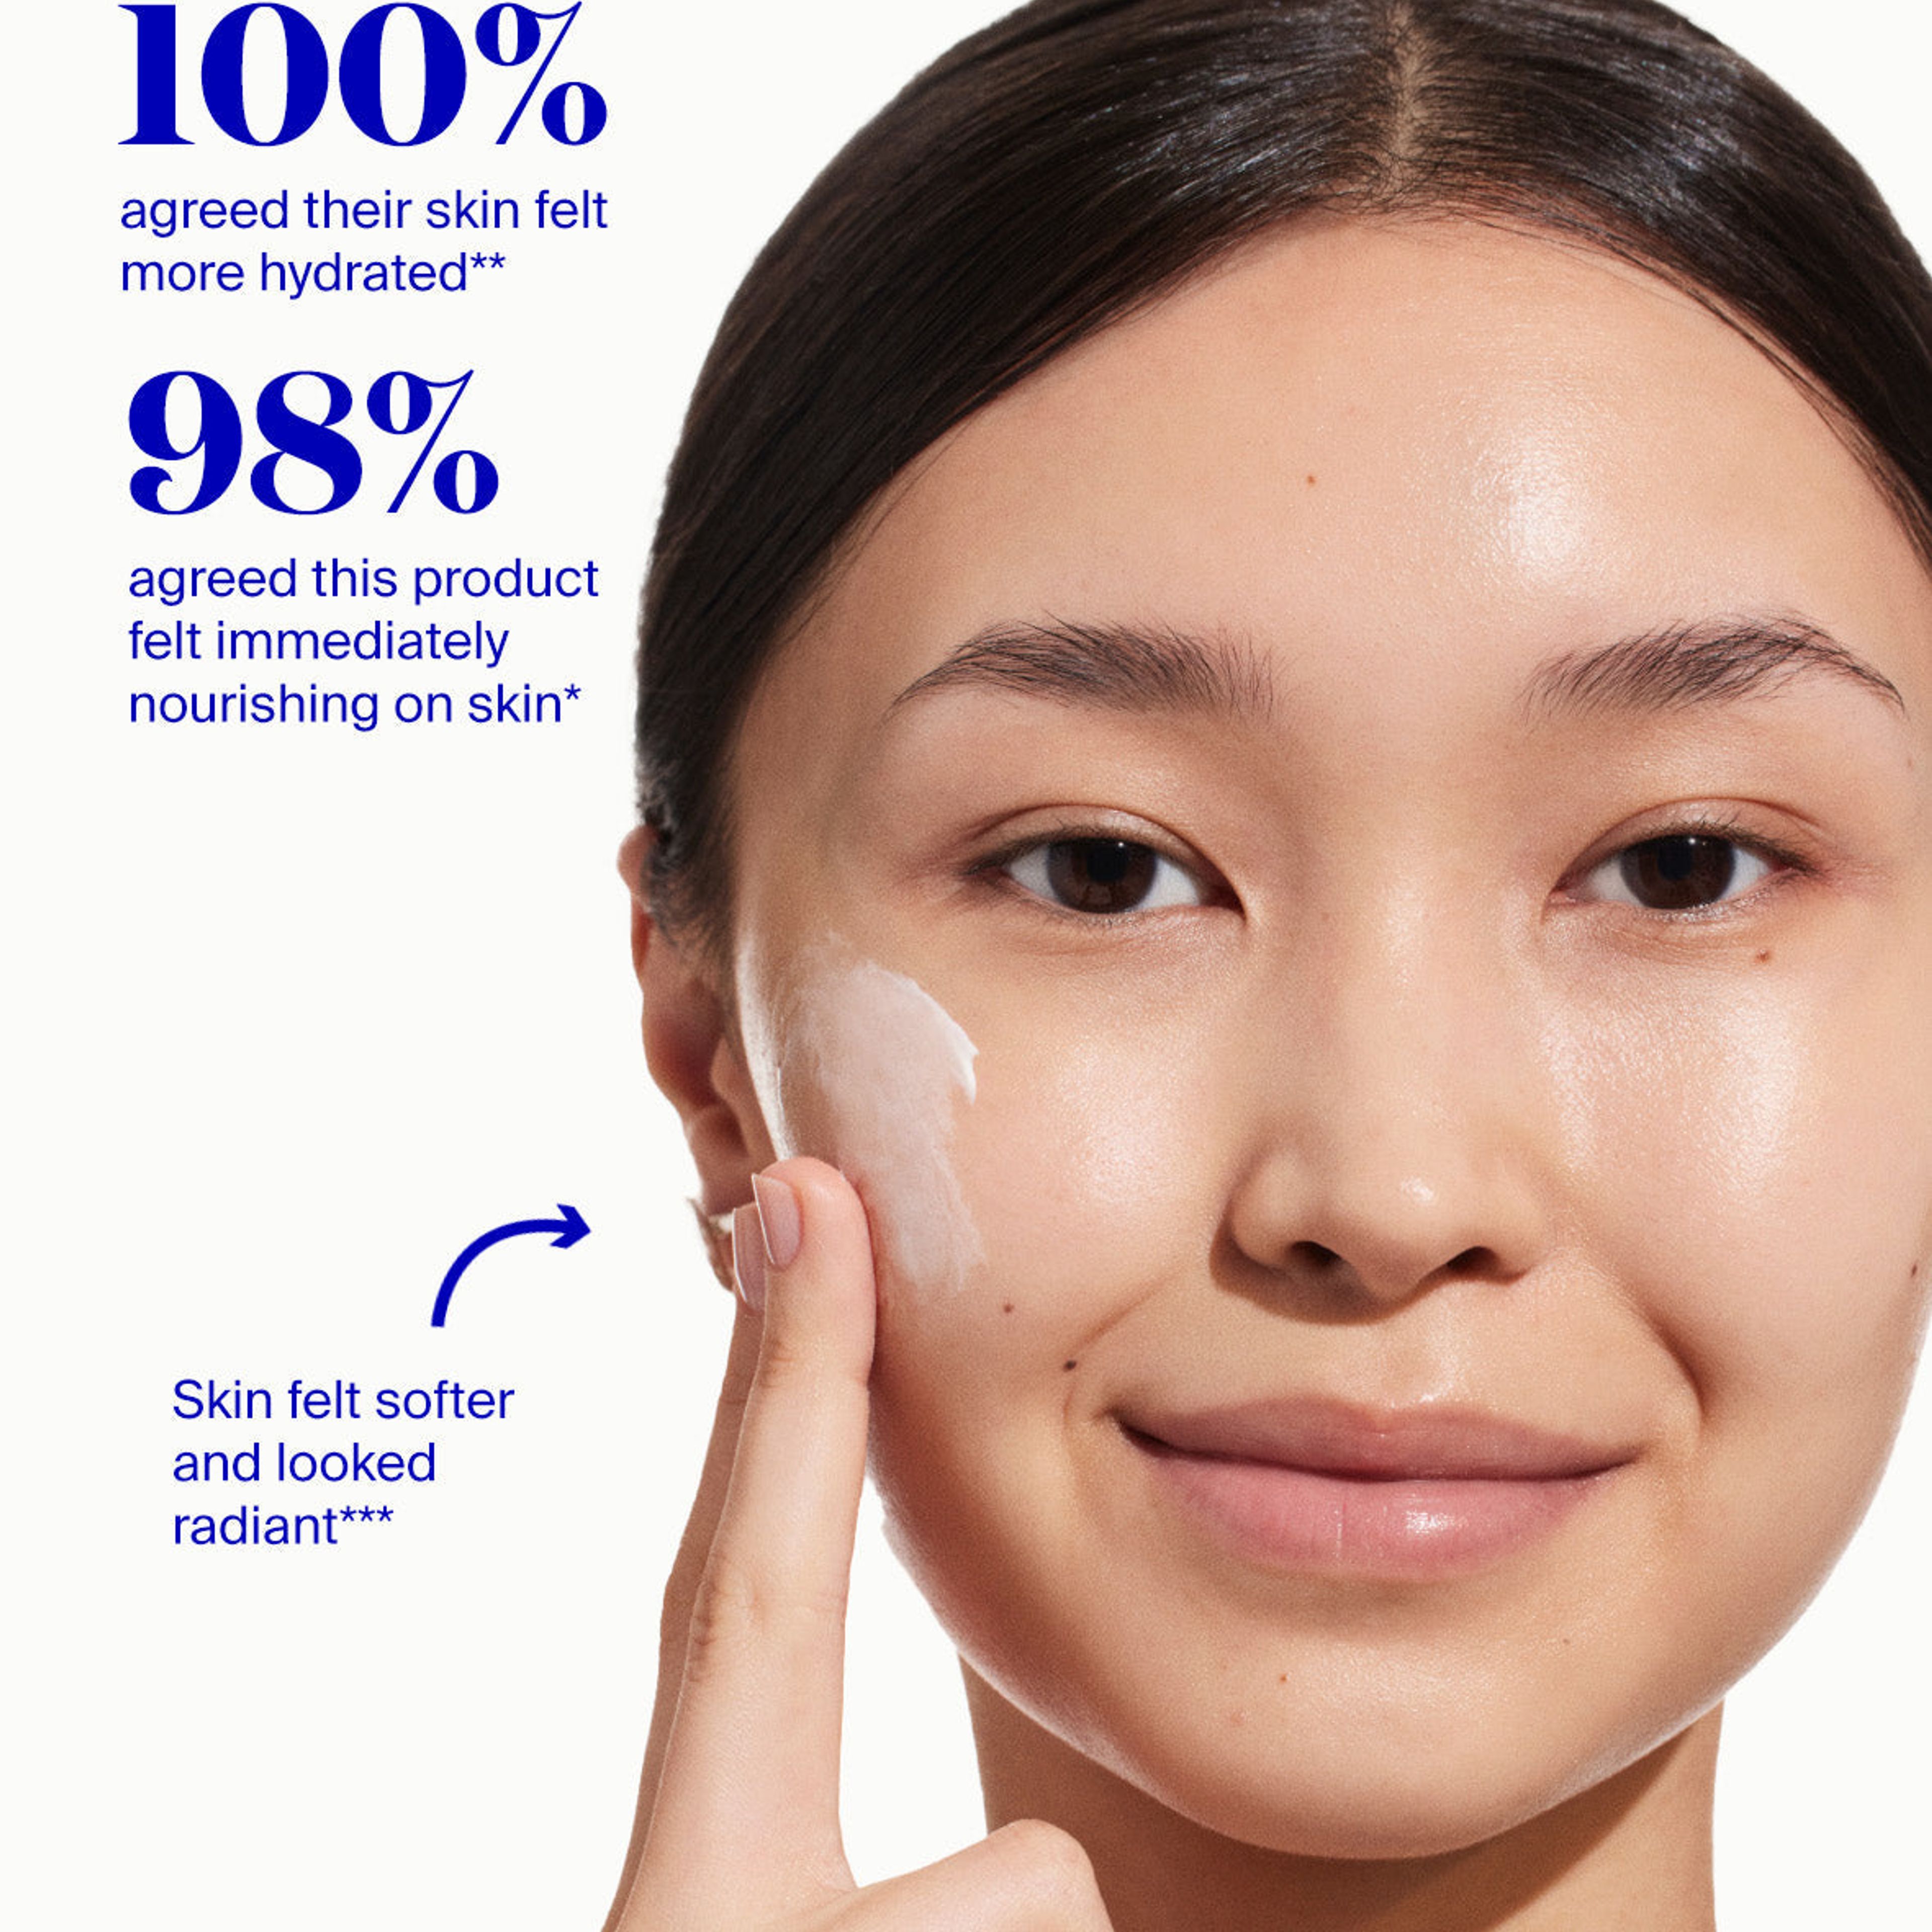 Superscreen Hydrating Daily Cream SPF 40